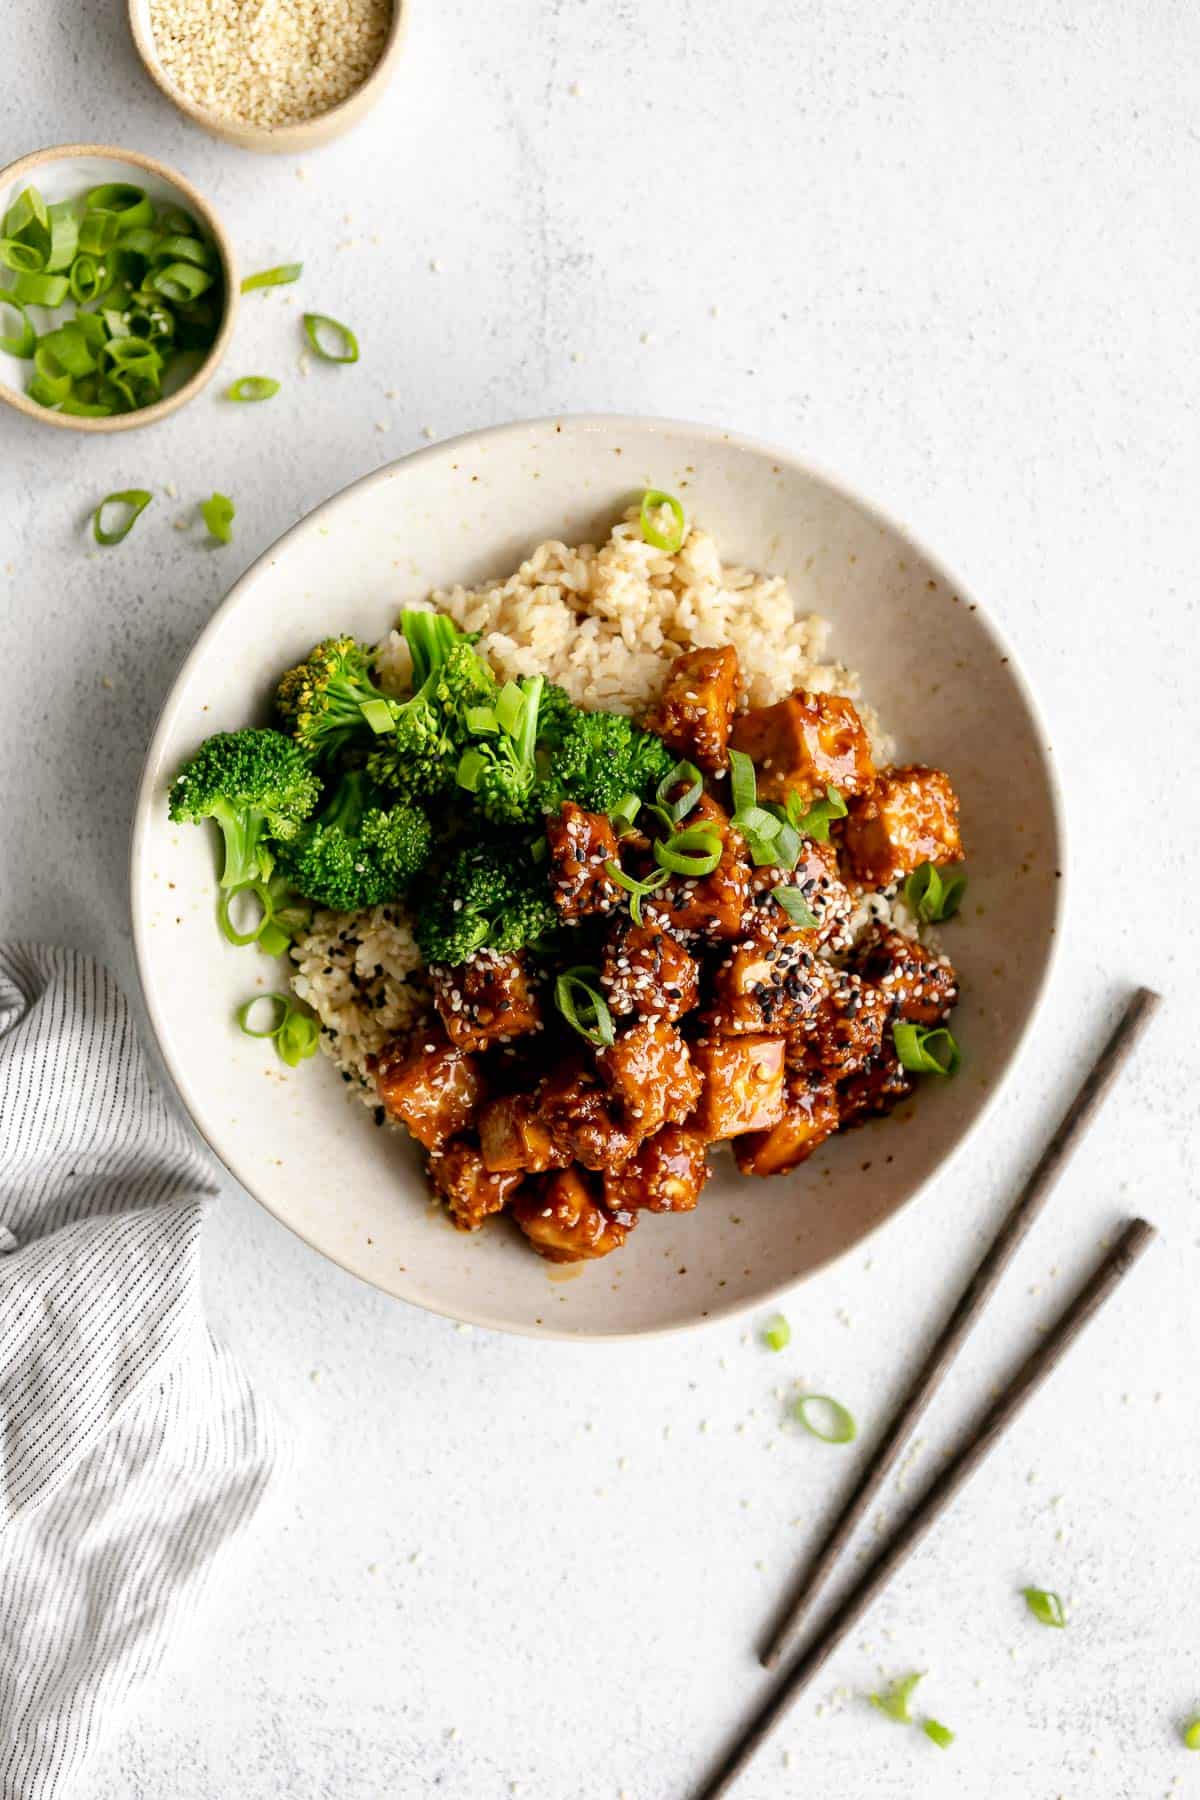 crispy baked sesame tofu in a bowl with broccoli and chopsticks